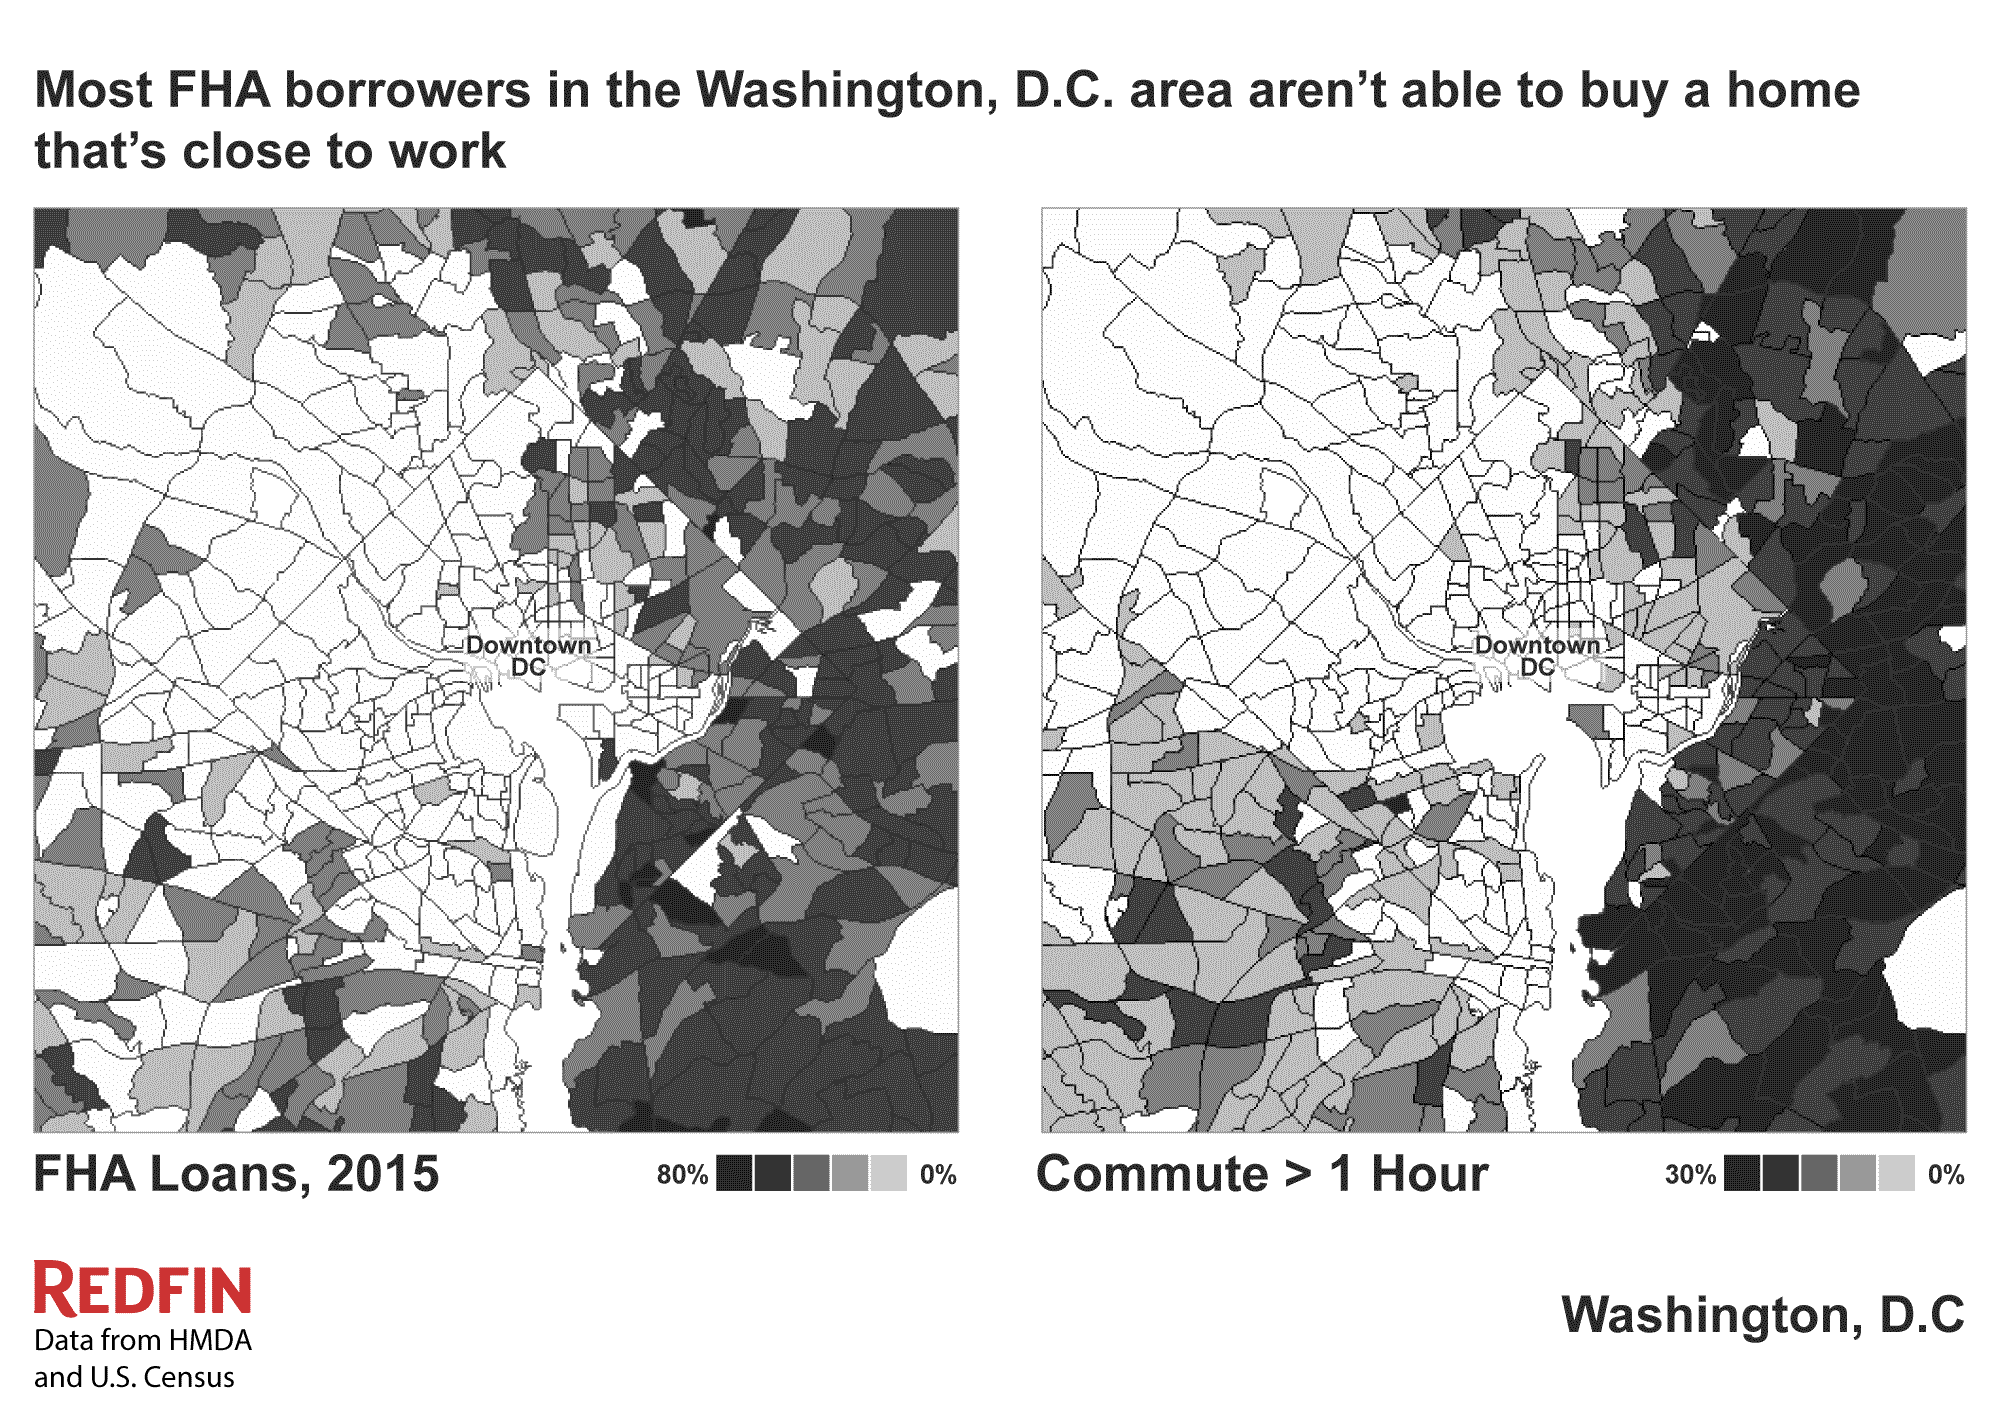 Figure: FHA loan share in the Washington, D.C. area (left), workers with a commute longer than one hour in the Washington, D.C. area (right)